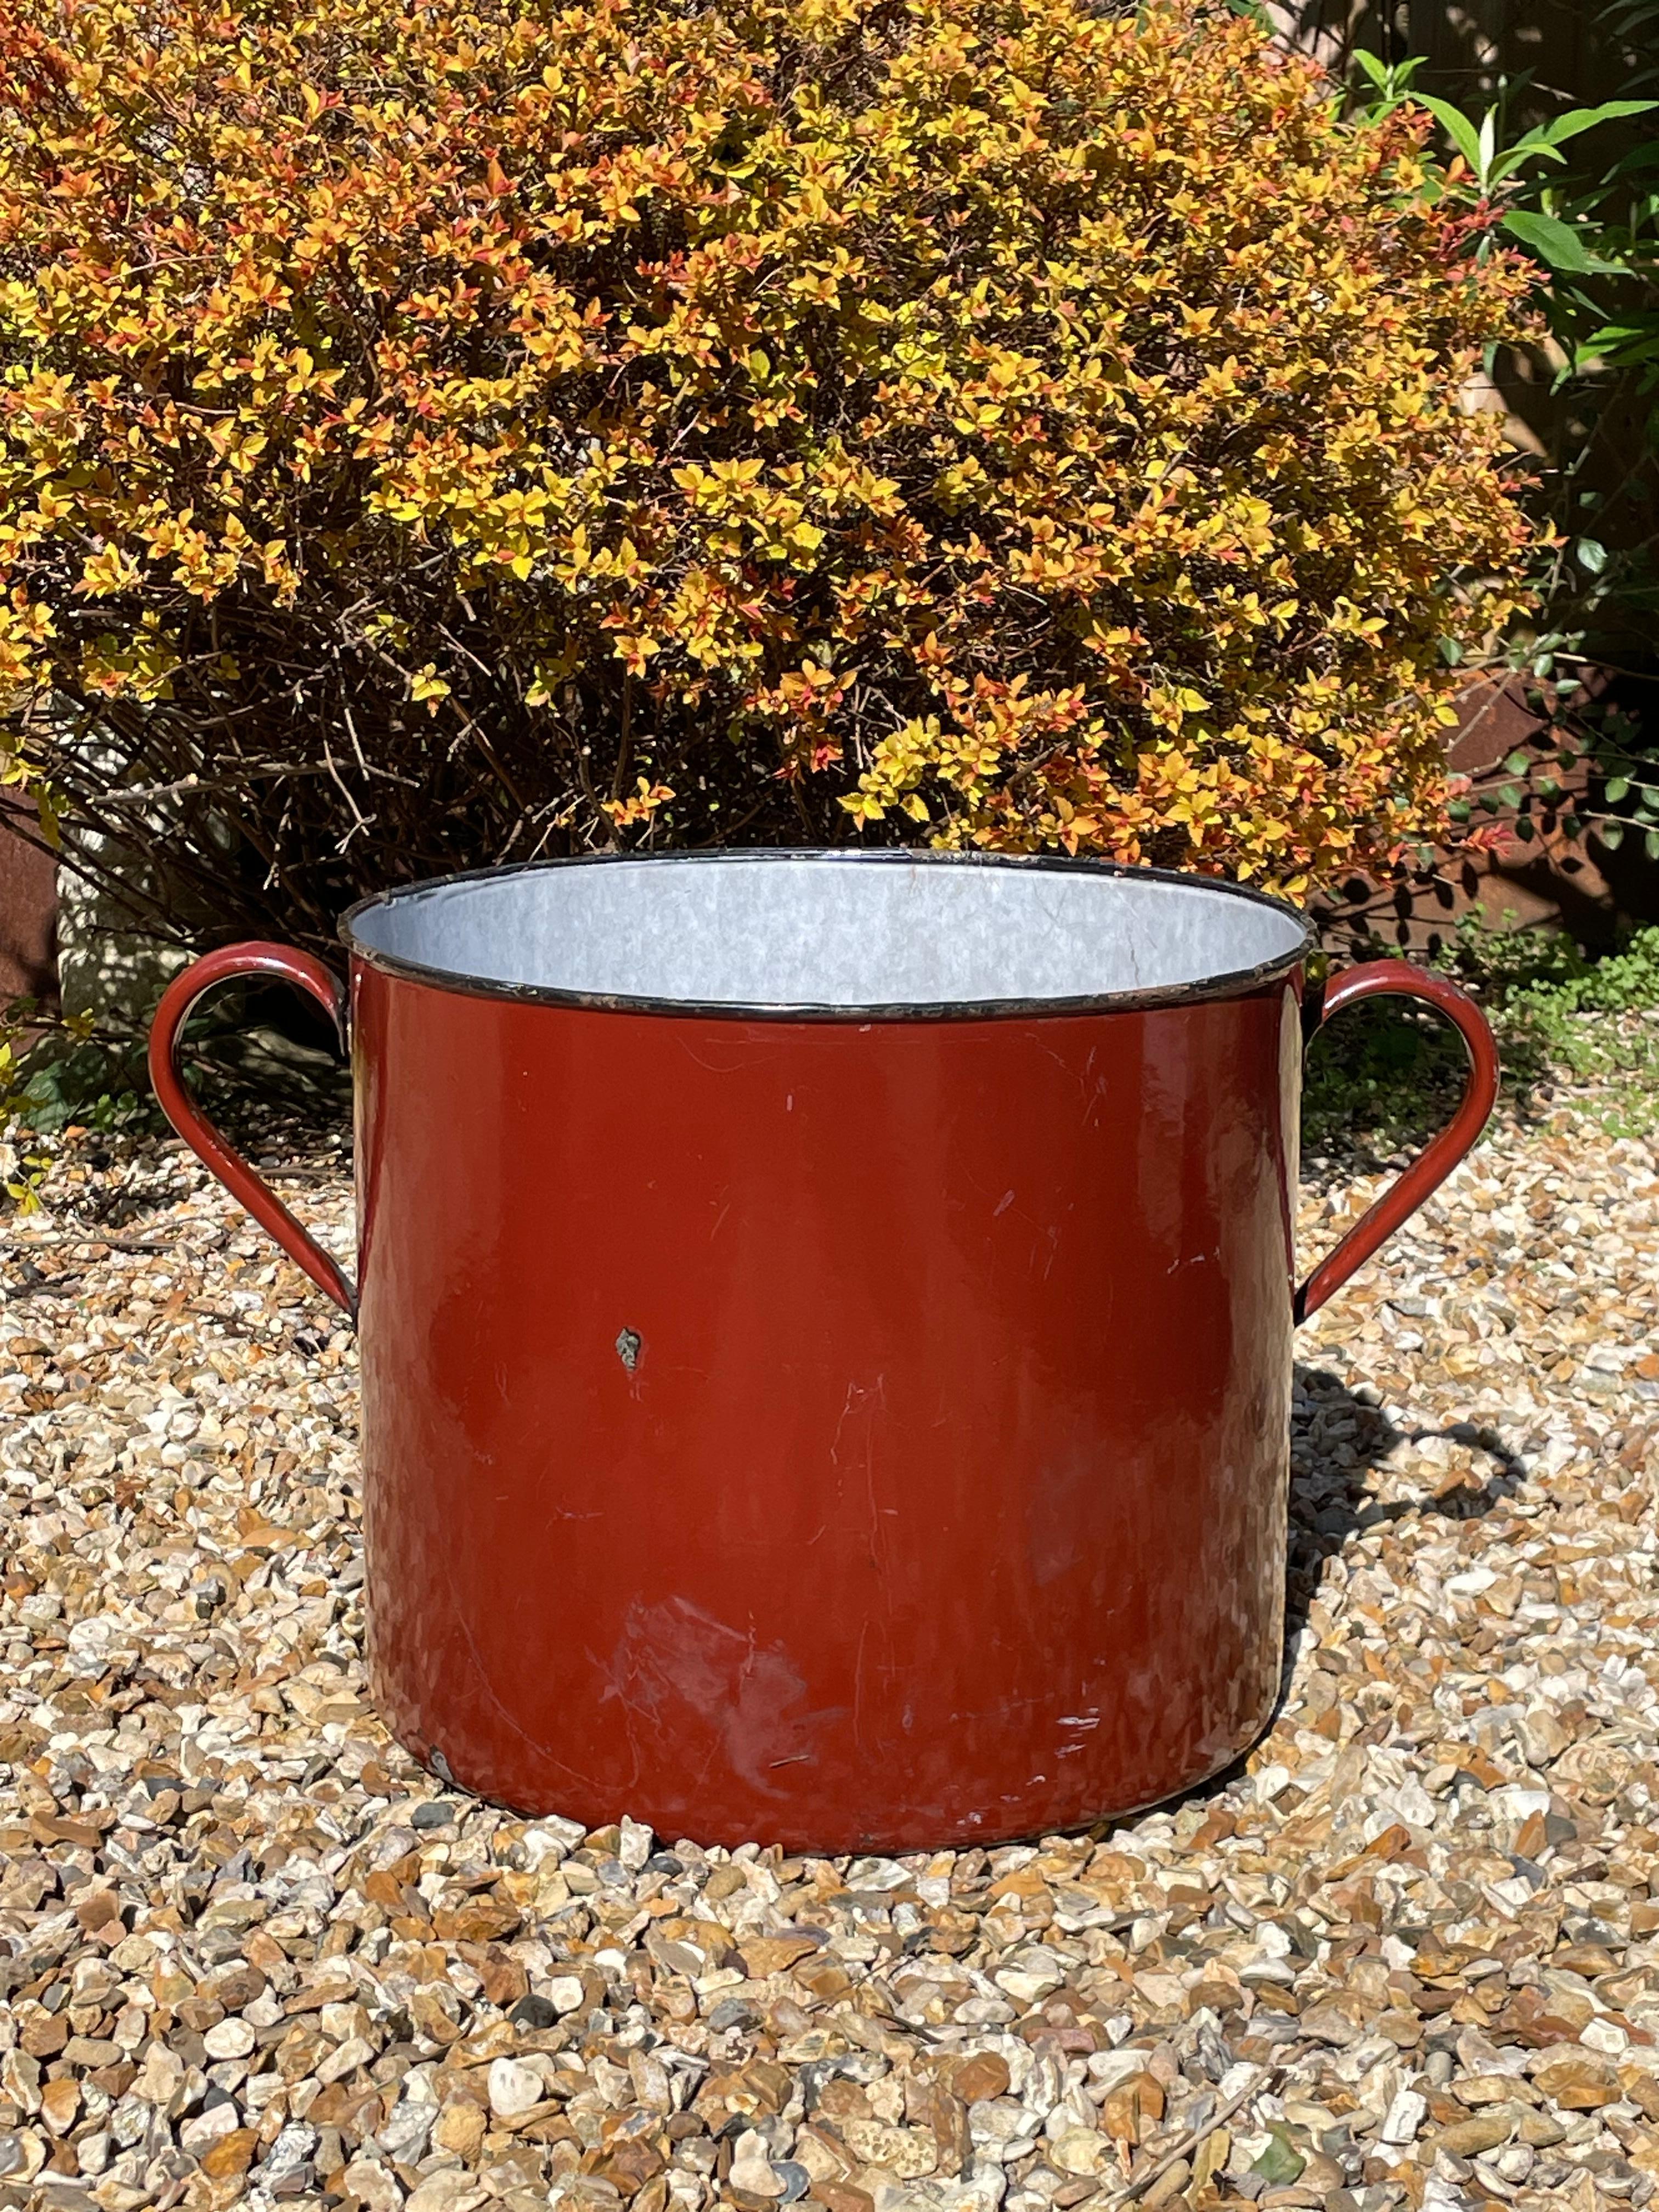 Extra large industrial oxide red enamelled planter. 

A beautiful large vintage piece with loads of character and patina. Large looped handles at the sides. This look beautiful planted with large shrubs or trees both inside and out.

We have three